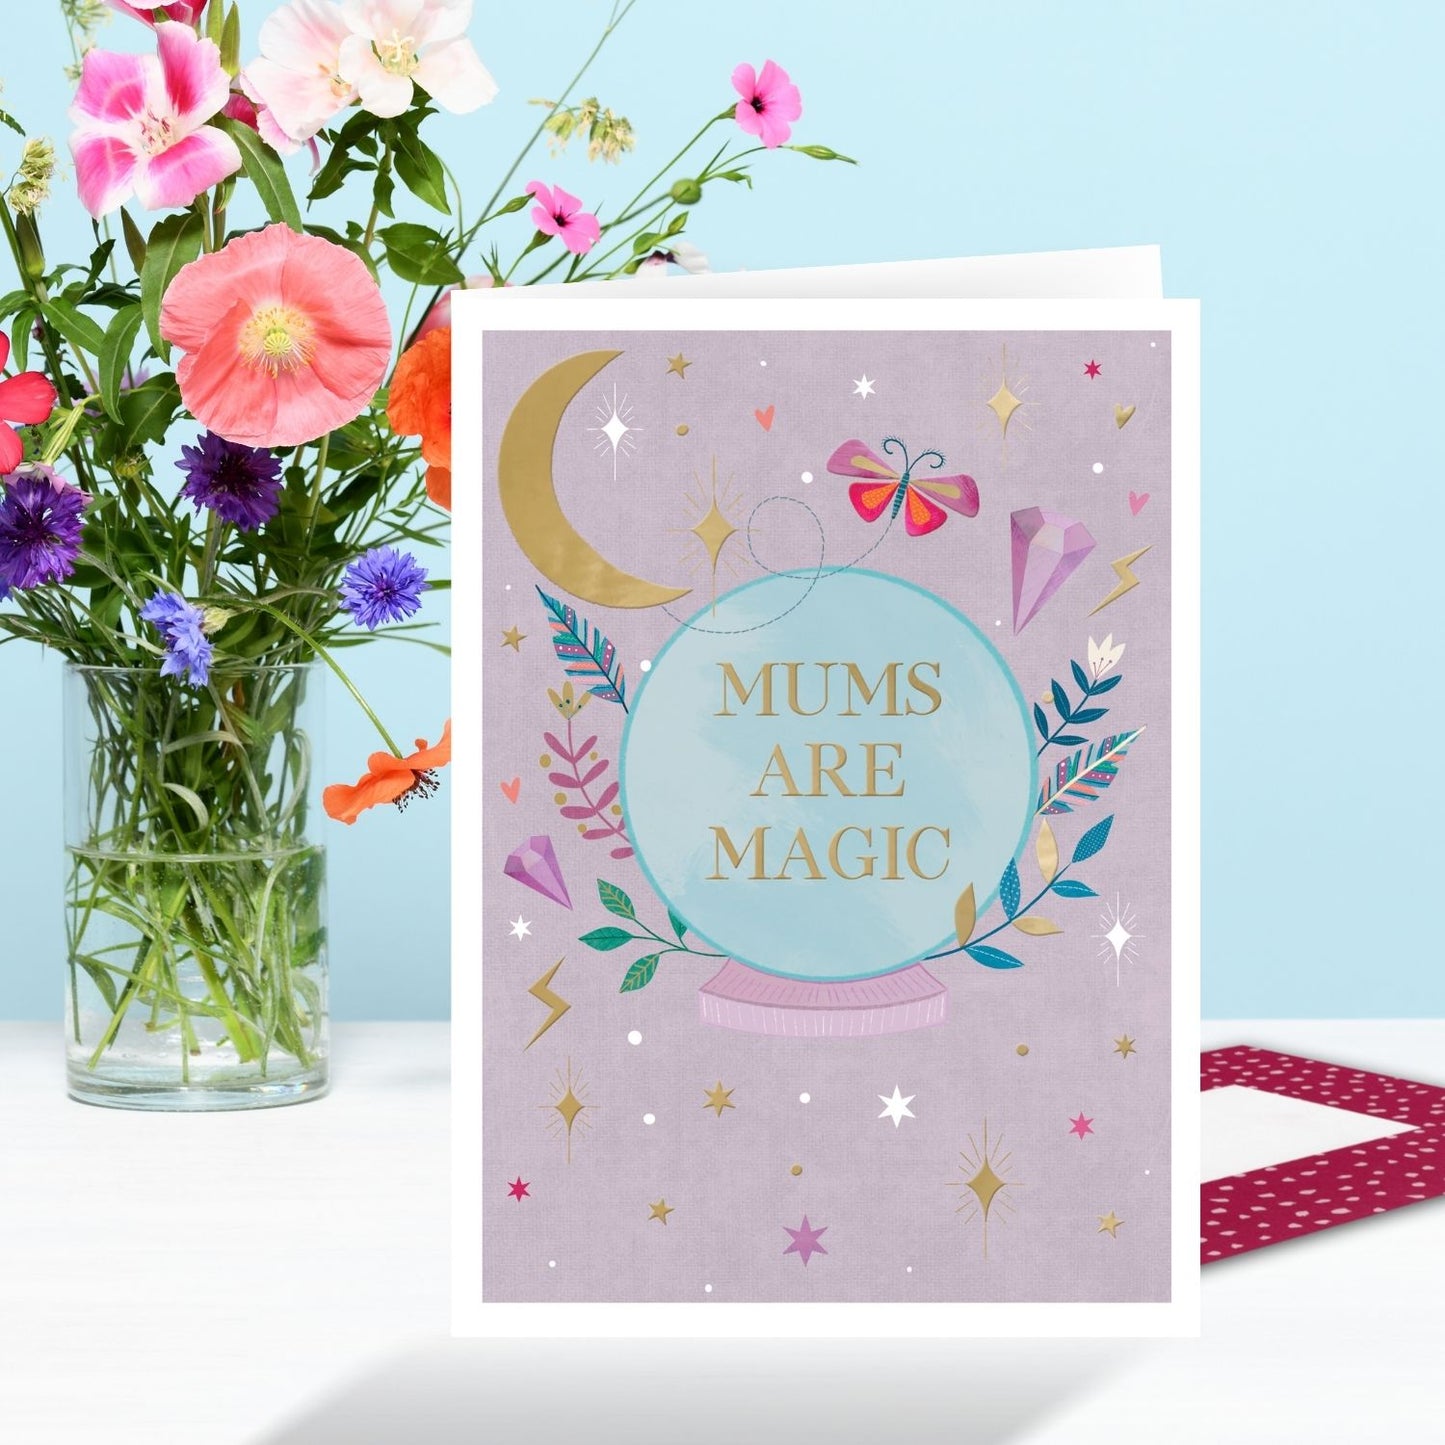 Mums Are Magic Future's Looking Bright! Mother's Day Contemporary Greeting Card